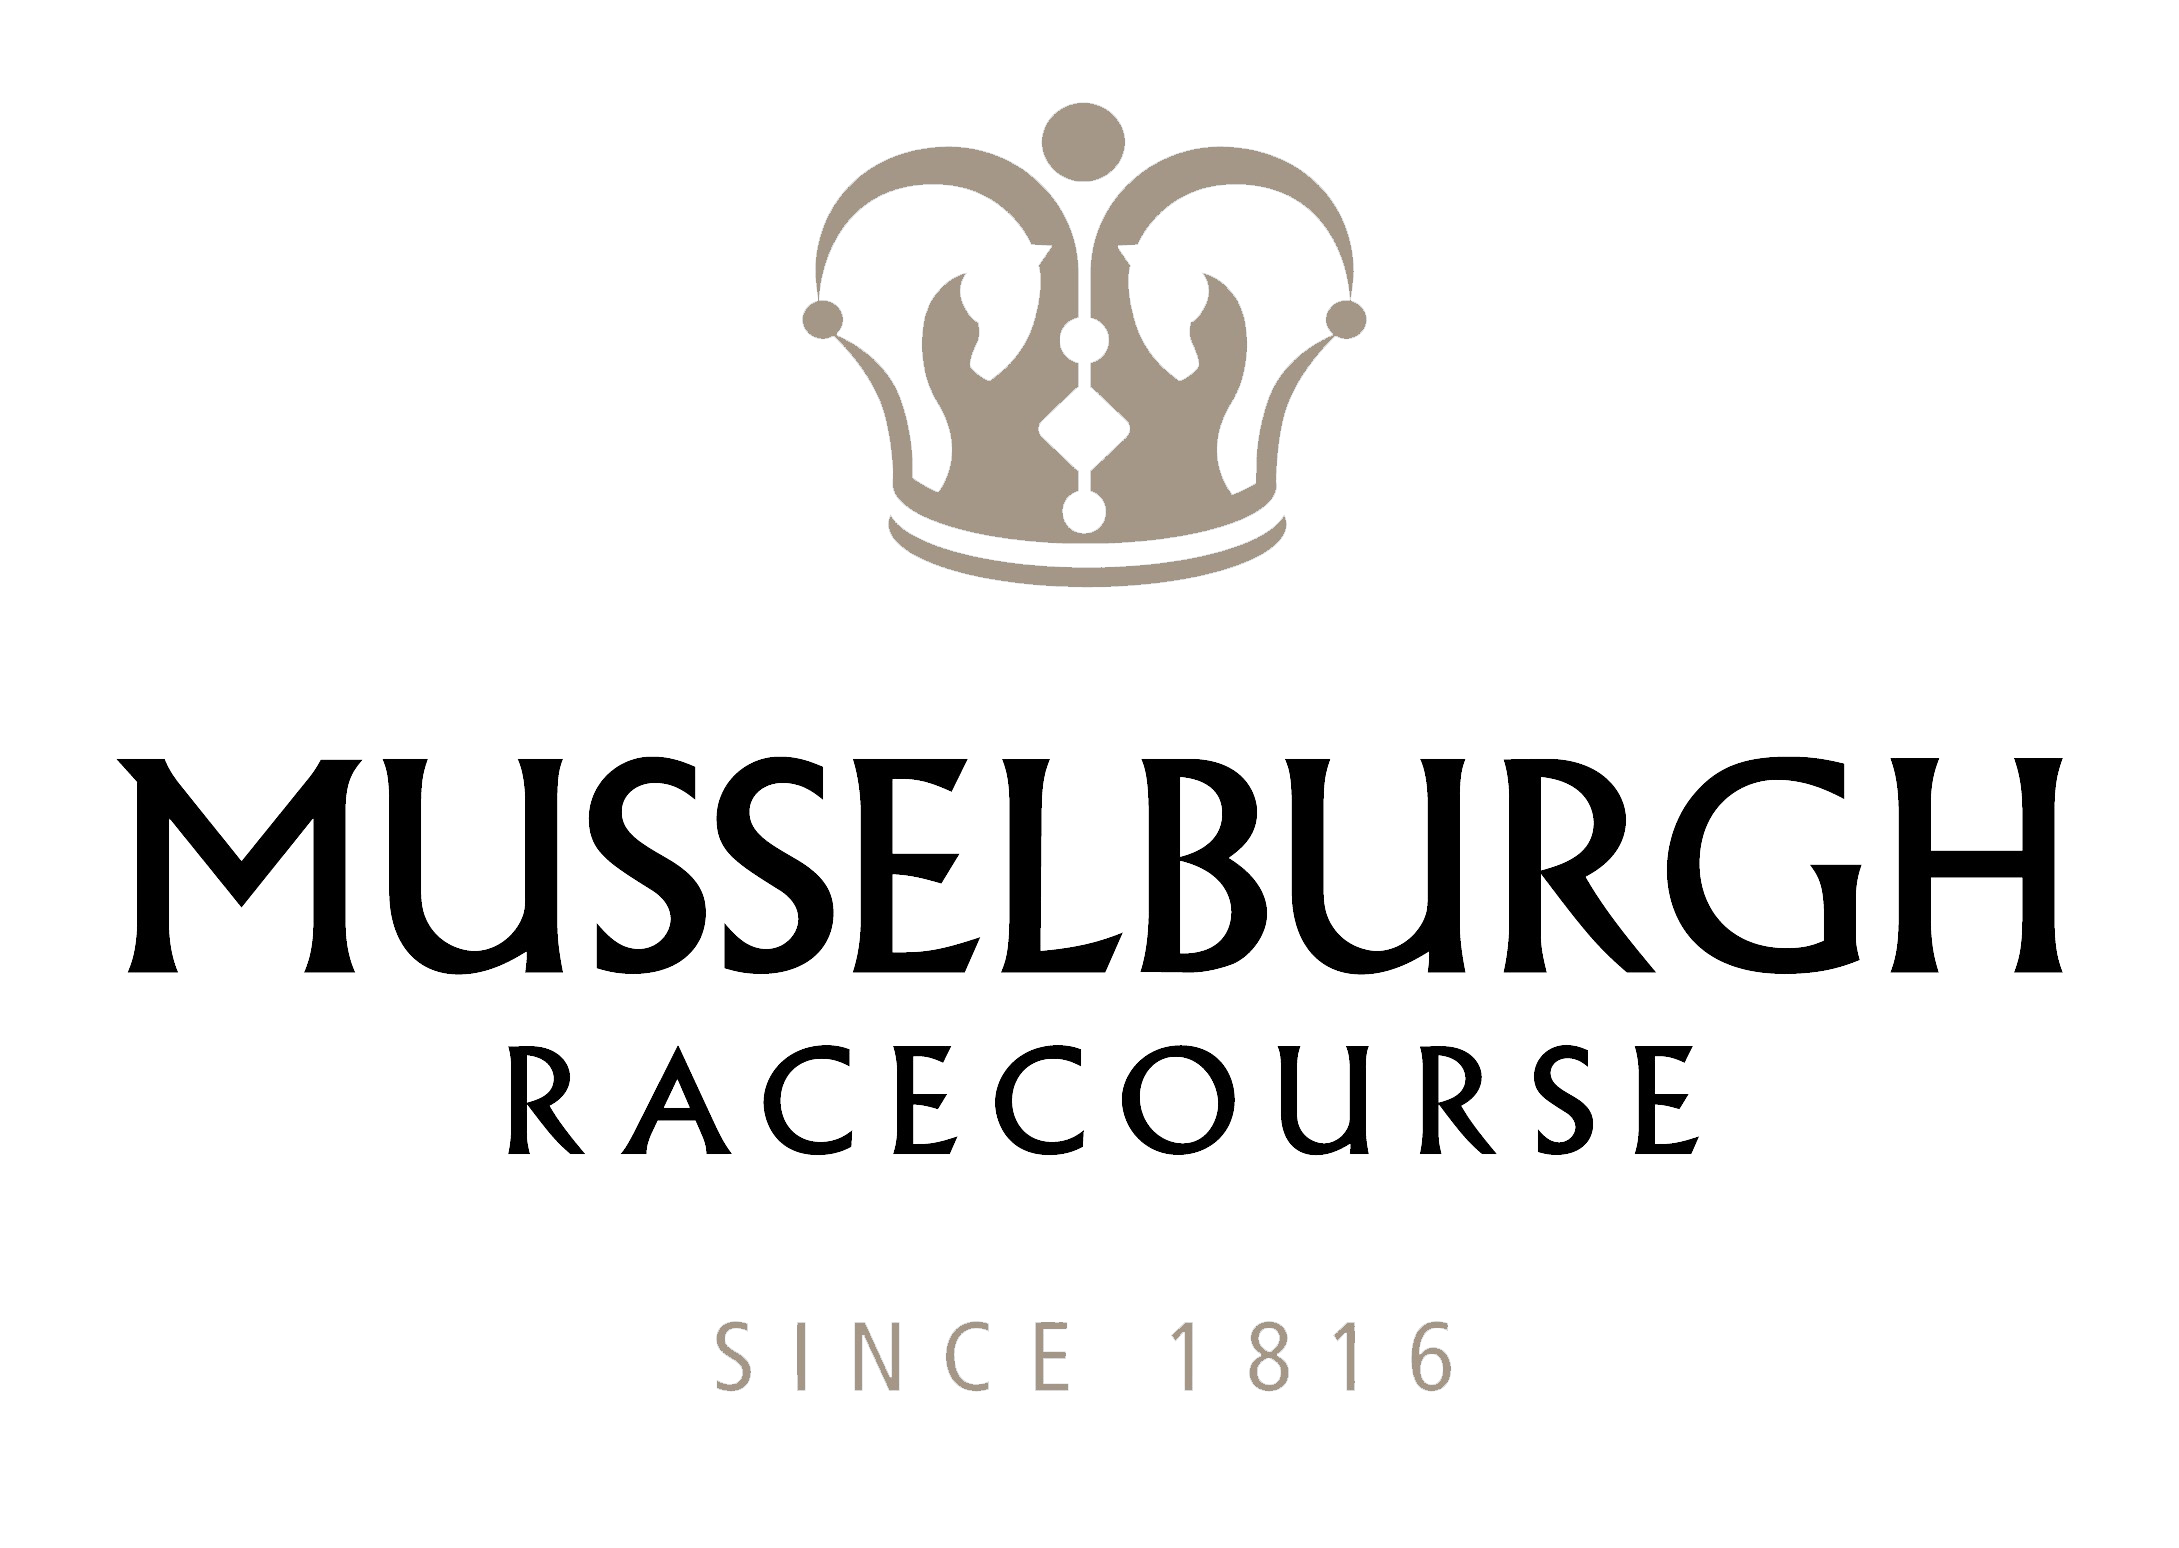 Musselburgh-Racecourse-black-on-white-logo.png